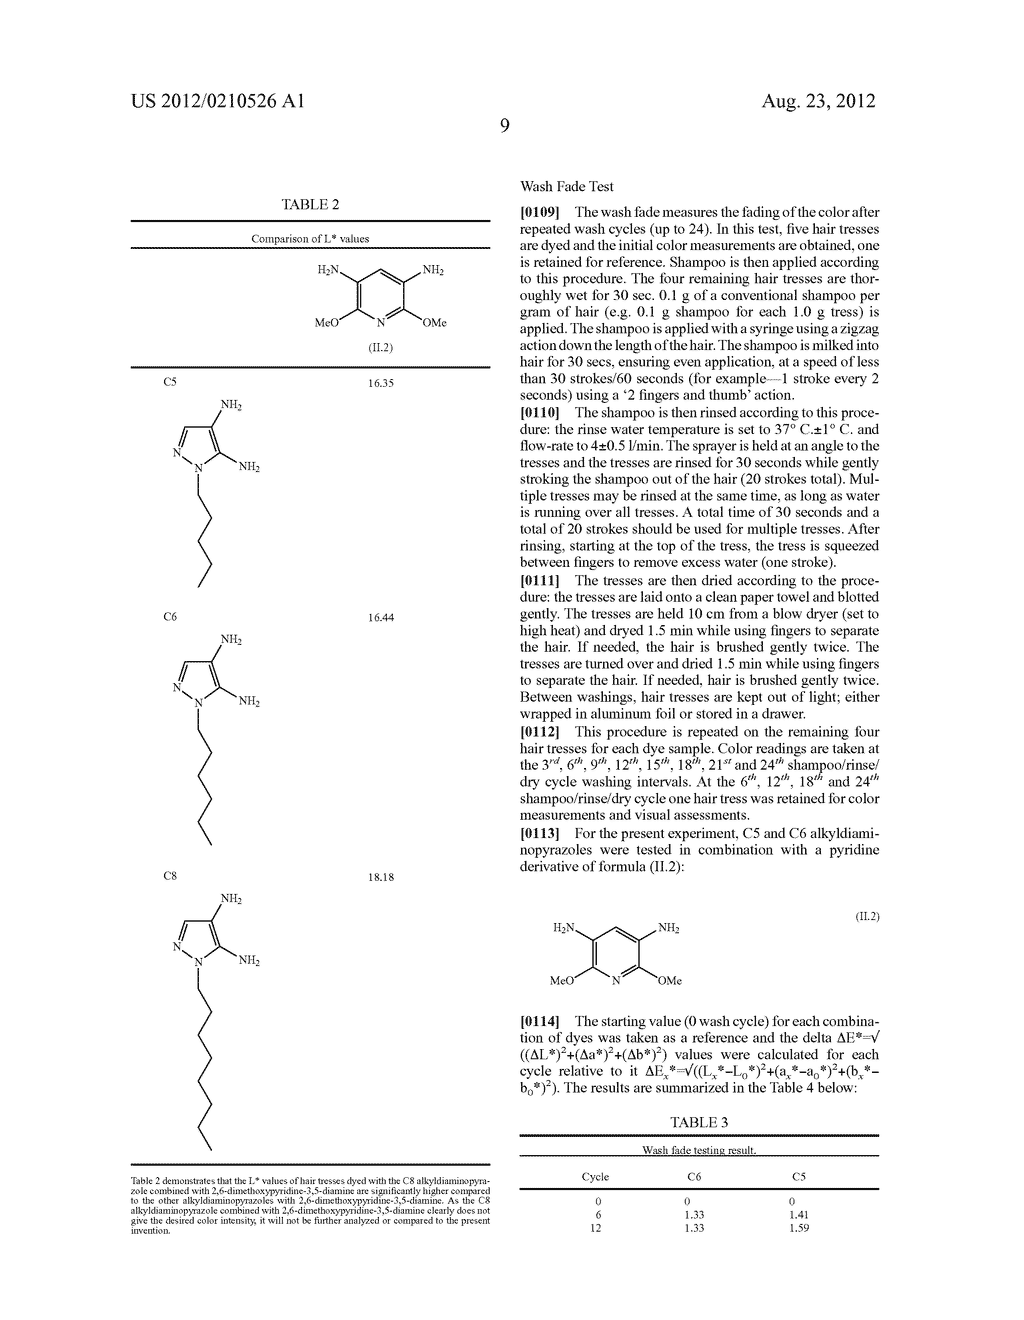 Oxidative Dyeing Compositions Comprising an     1-Hexyl/Heptyl-4,5-diaminopyrazole and a Pyridine and Derivatives Thereof - diagram, schematic, and image 11